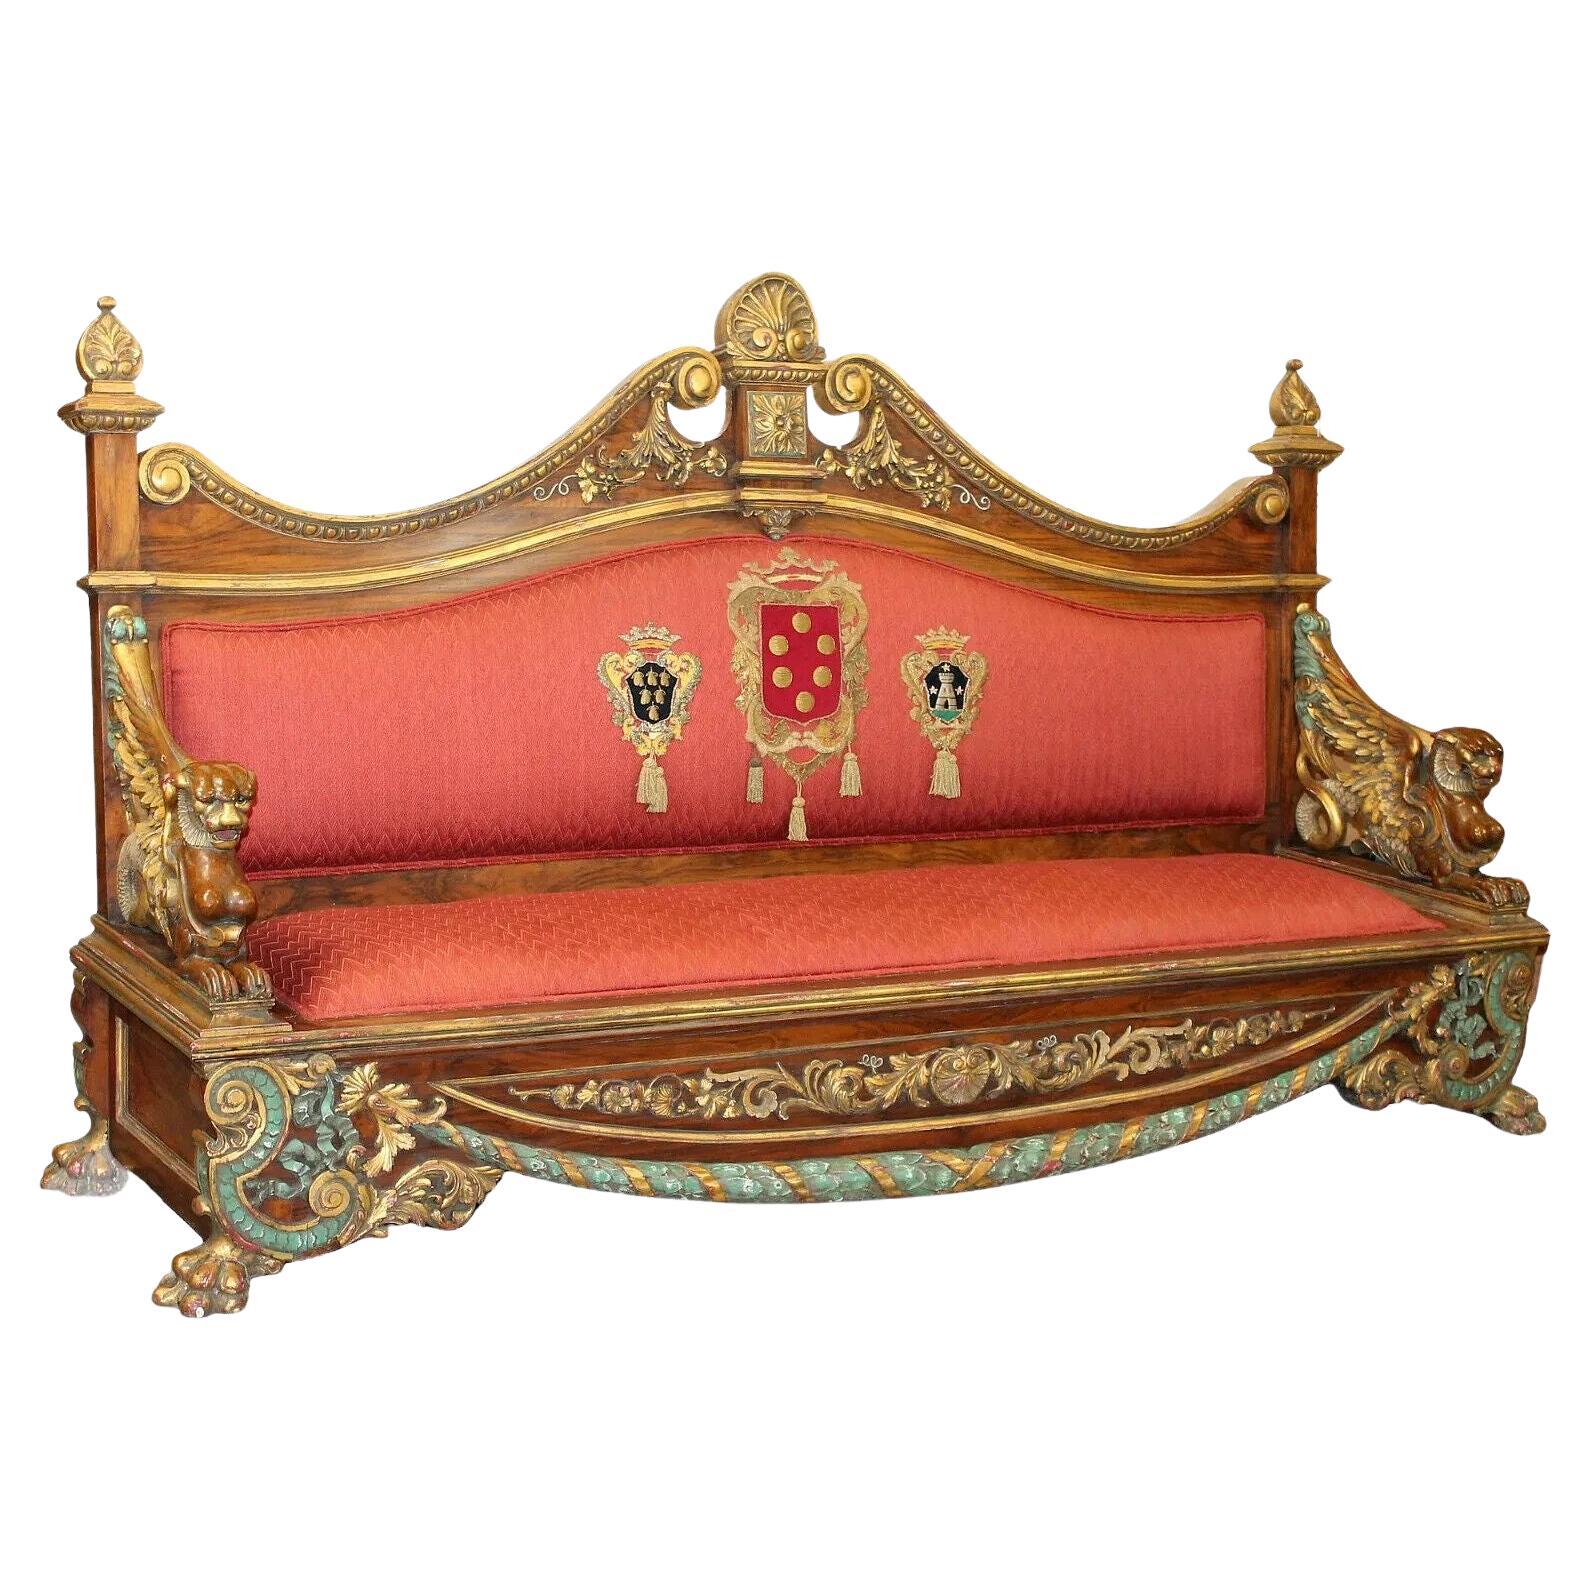 https://a.1stdibscdn.com/19th-century-antique-italian-sofa-carved-polychrome-walnut-with-griffins-for-sale/f_81502/f_328590821676834960626/f_32859082_1676834961130_bg_processed.jpg